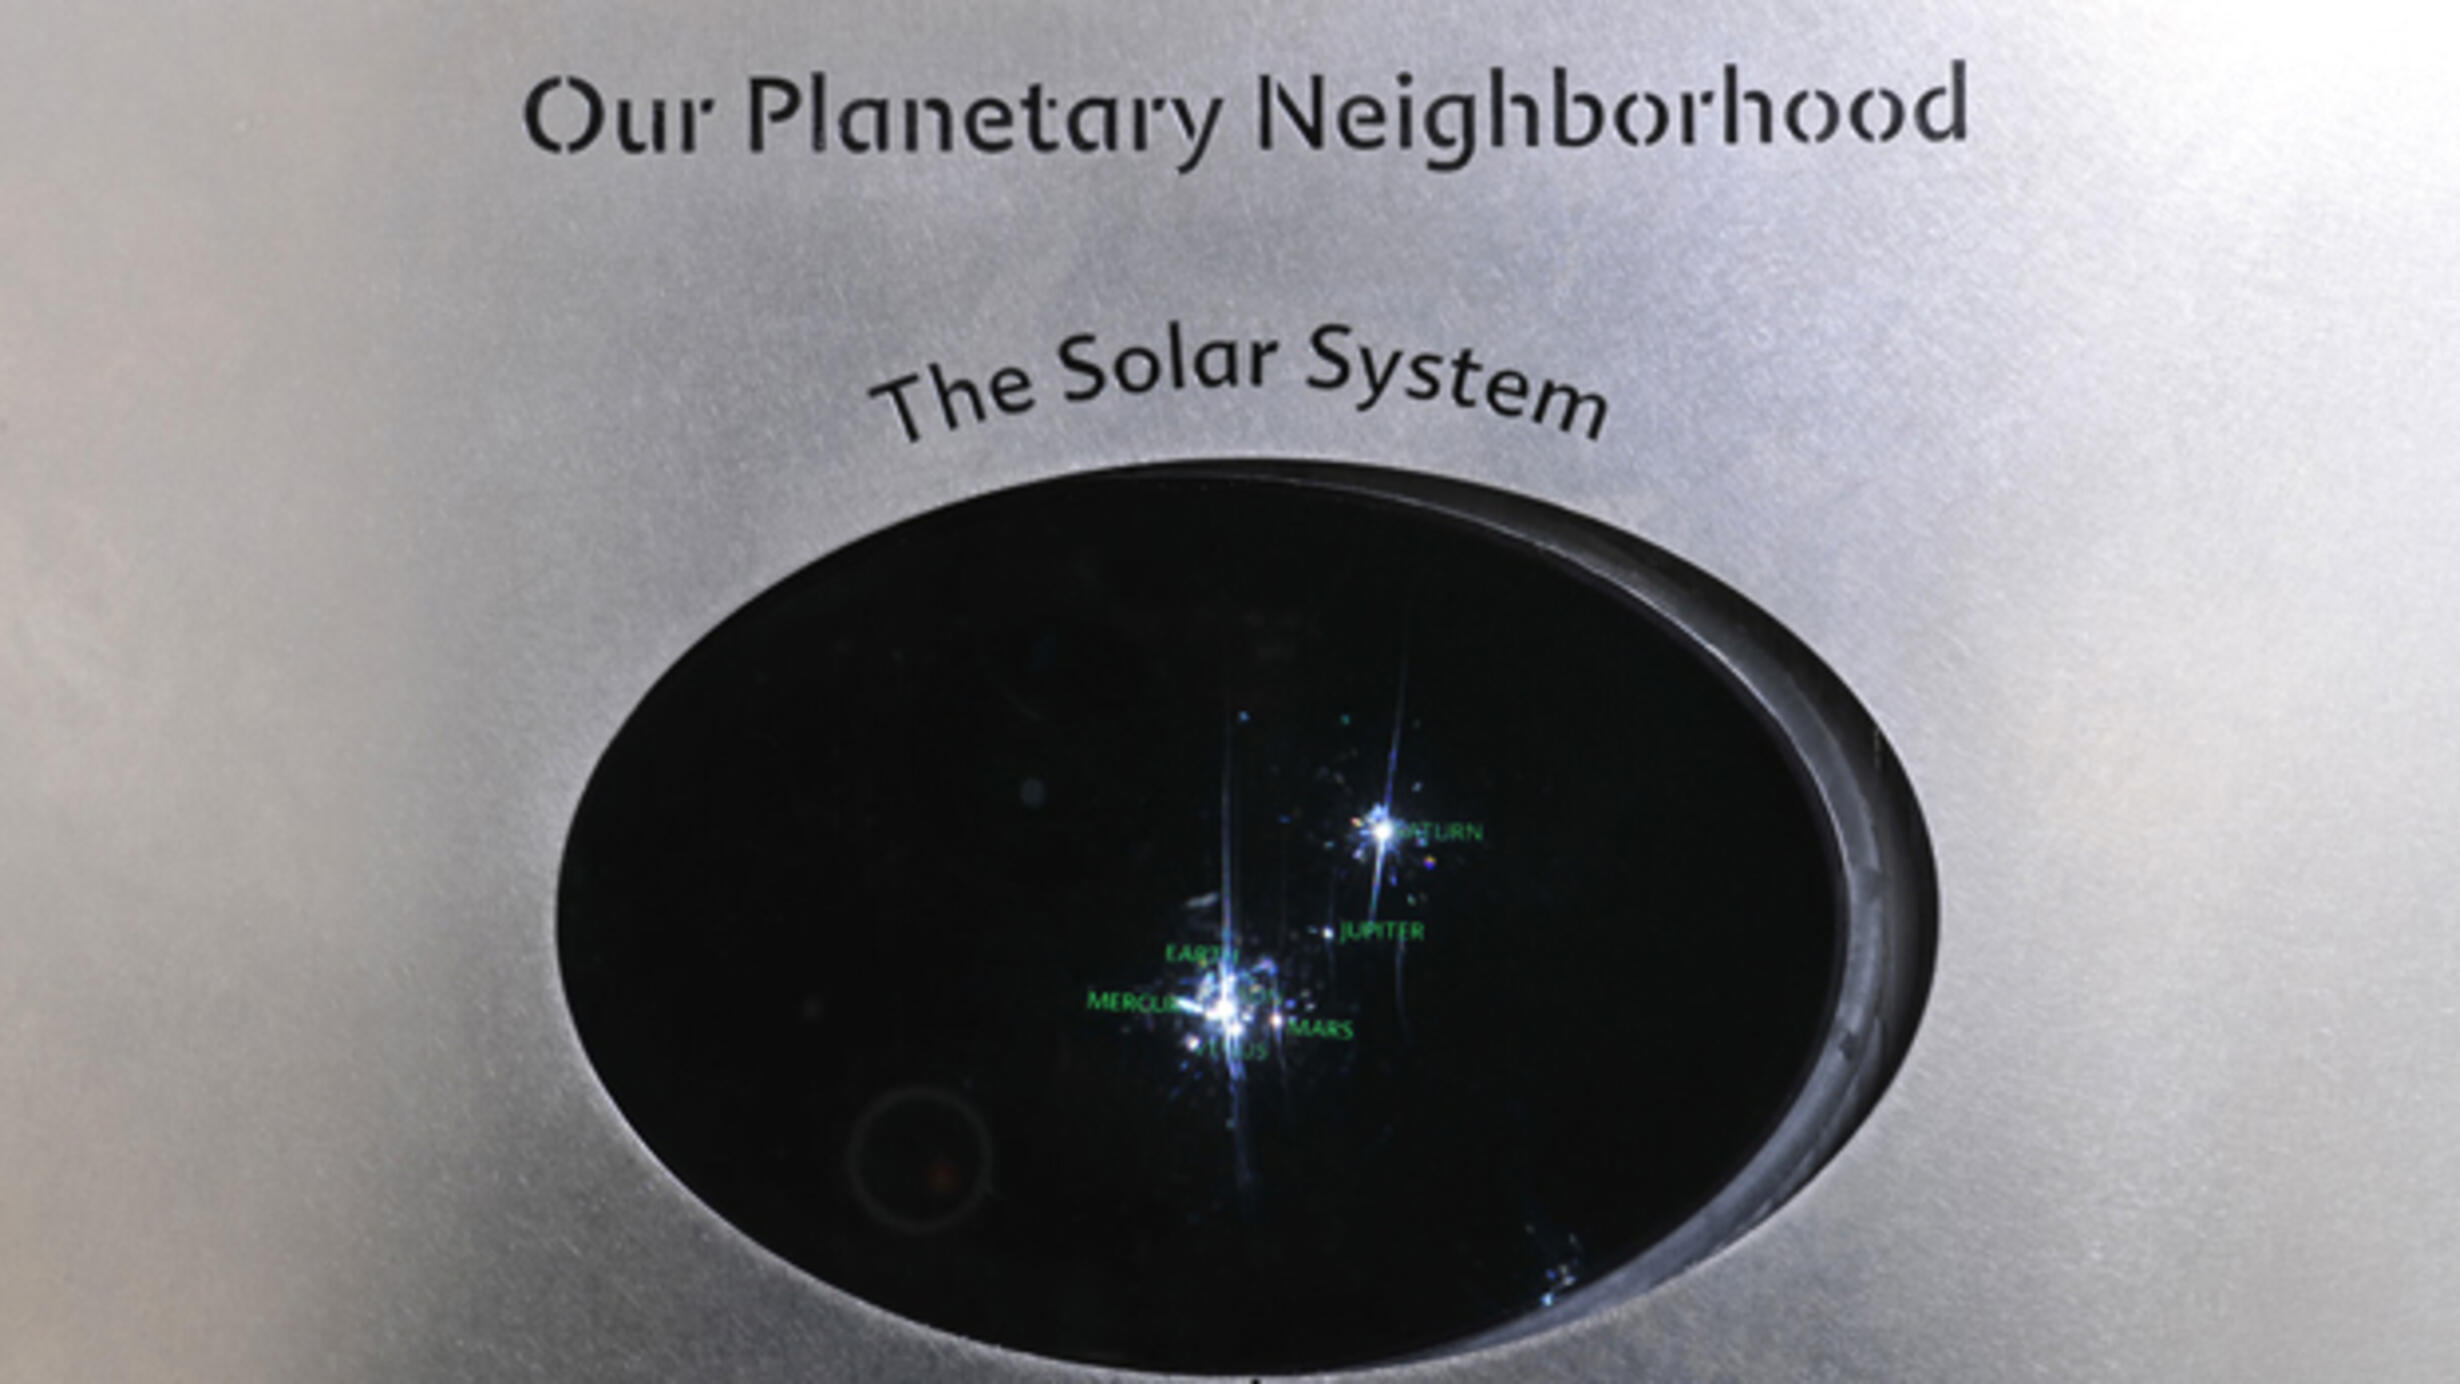 A dark window with points of light representing the bodies in our solar system, in a wall exhibition titled, "Our Planetary Neighborhood.”